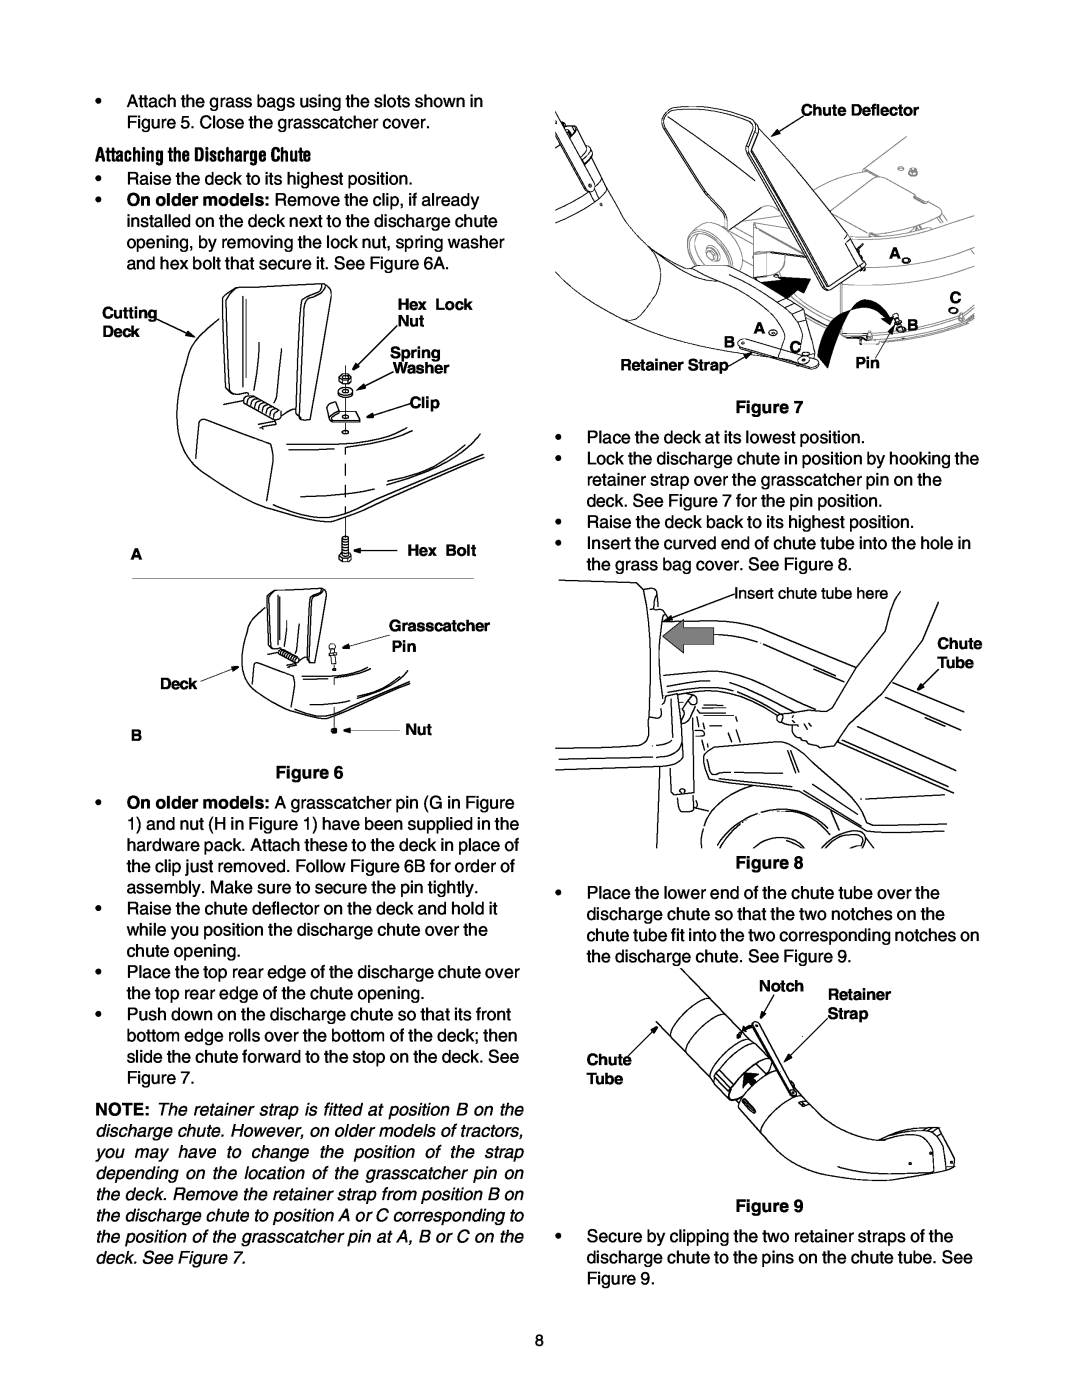 Cub Cadet 190- 670-100, 190-678-100, 190-670-100 manual Attaching the Discharge Chute 